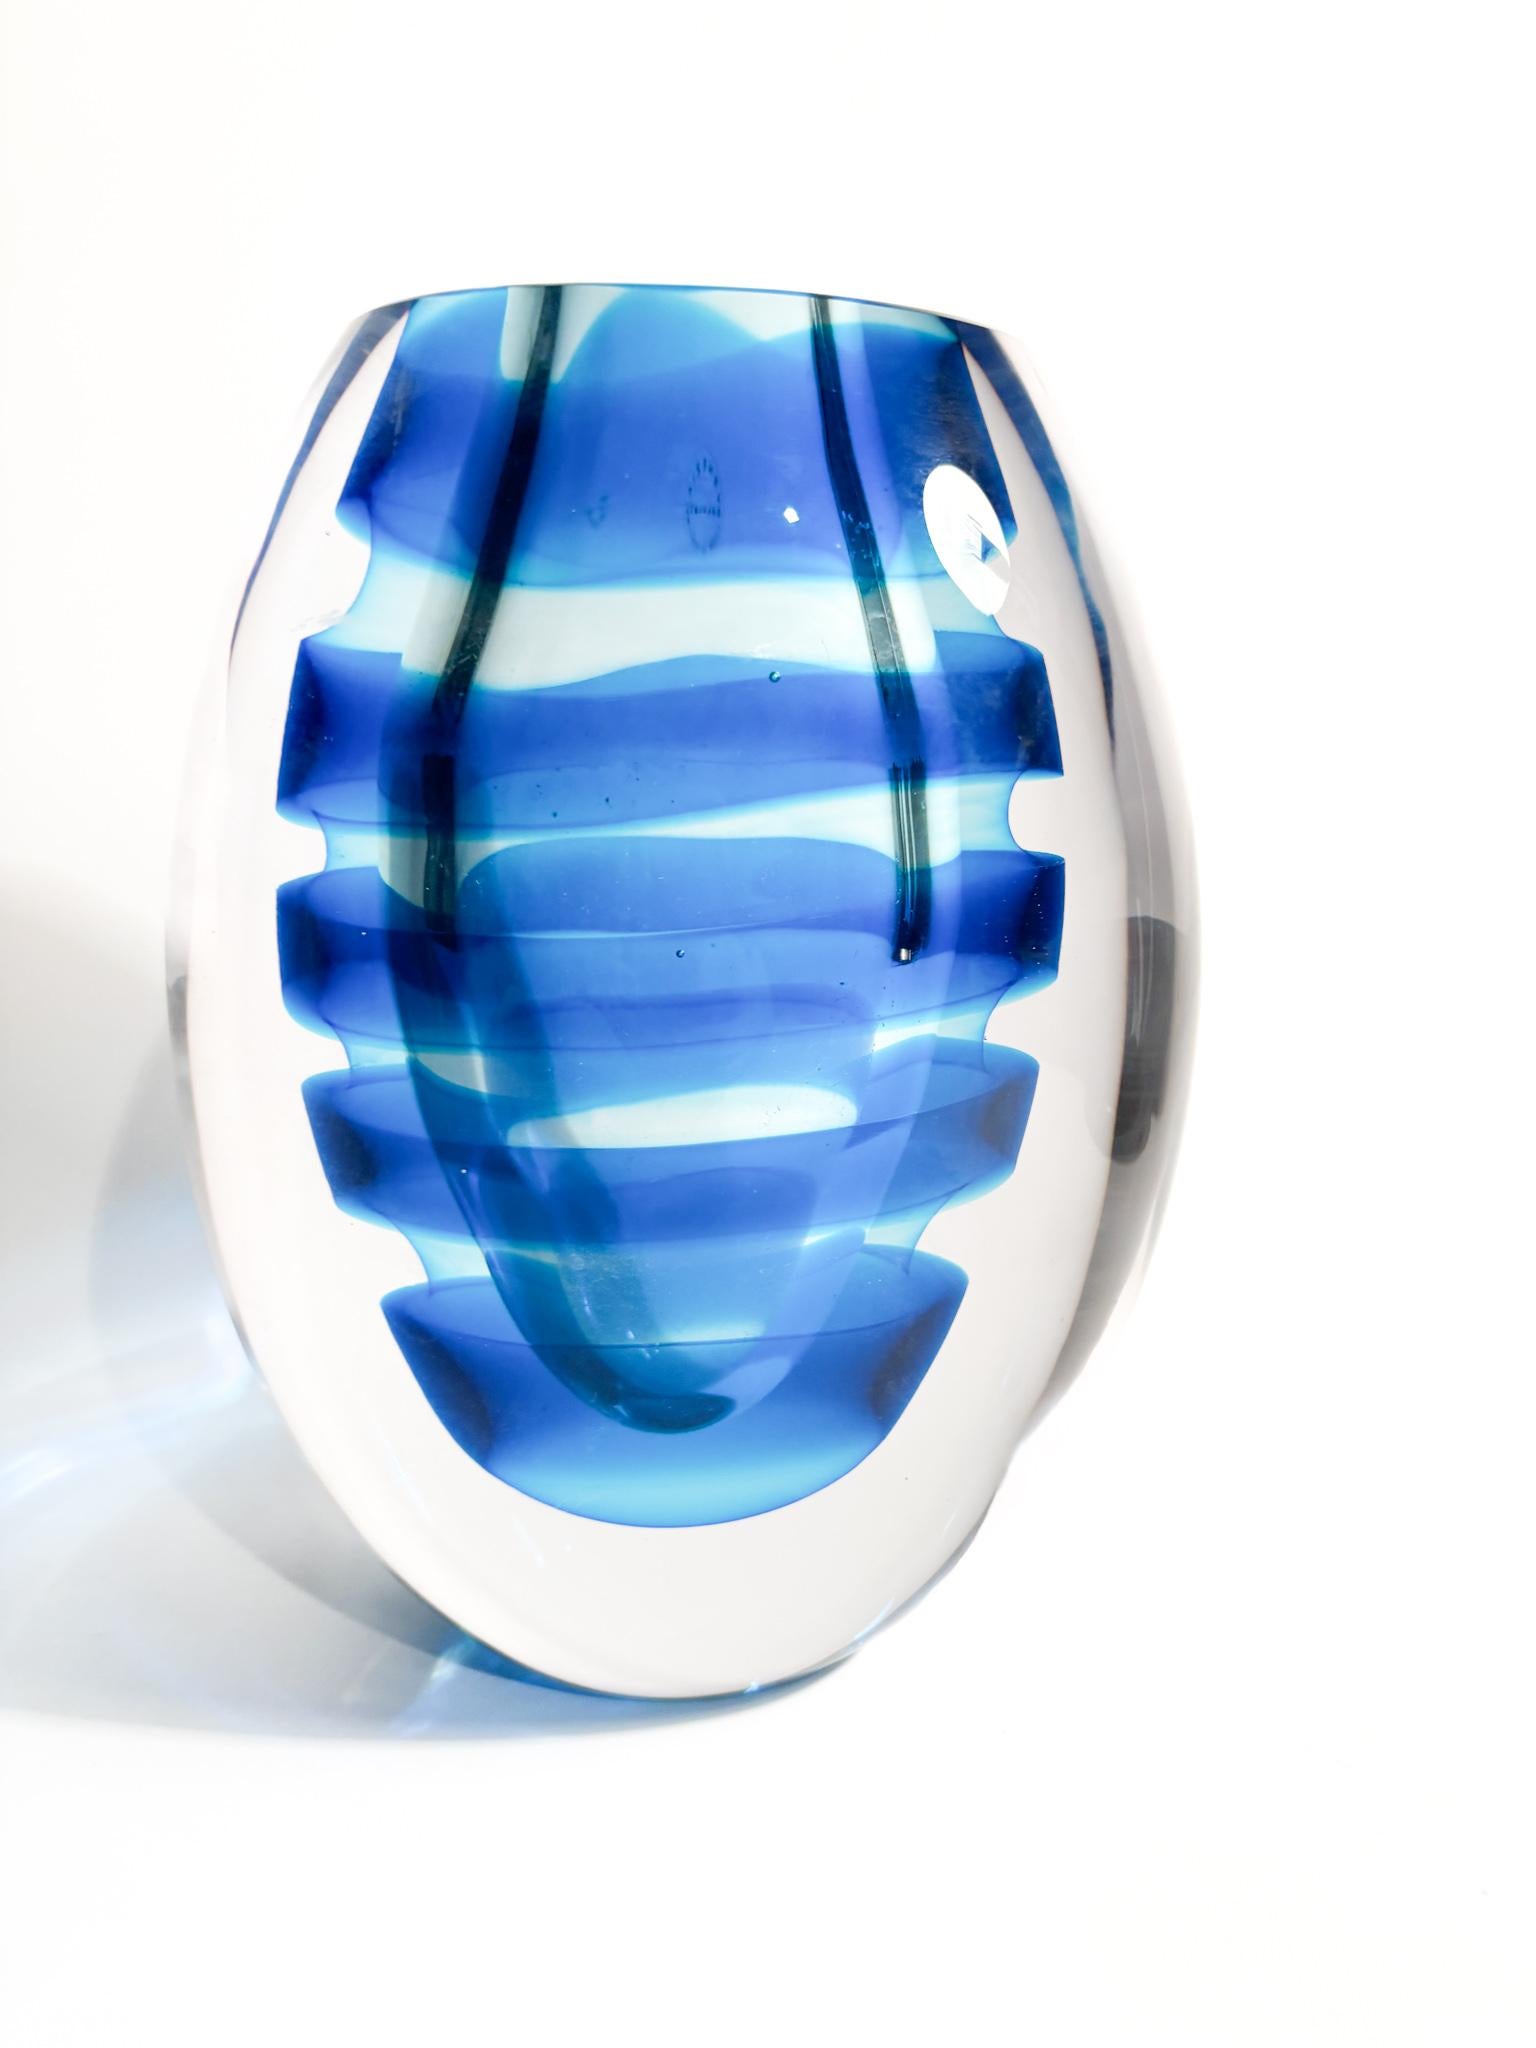 Elliptical vase in submerged Murano glass with blue spirals, made by Salviati in 2003.

Ø 17 cm Ø 12 cm h 21 cm

Salviati is a prestigious glass manufacturer based in Murano, Venice, Italy. Founded in 1859, it is one of the oldest and most respected